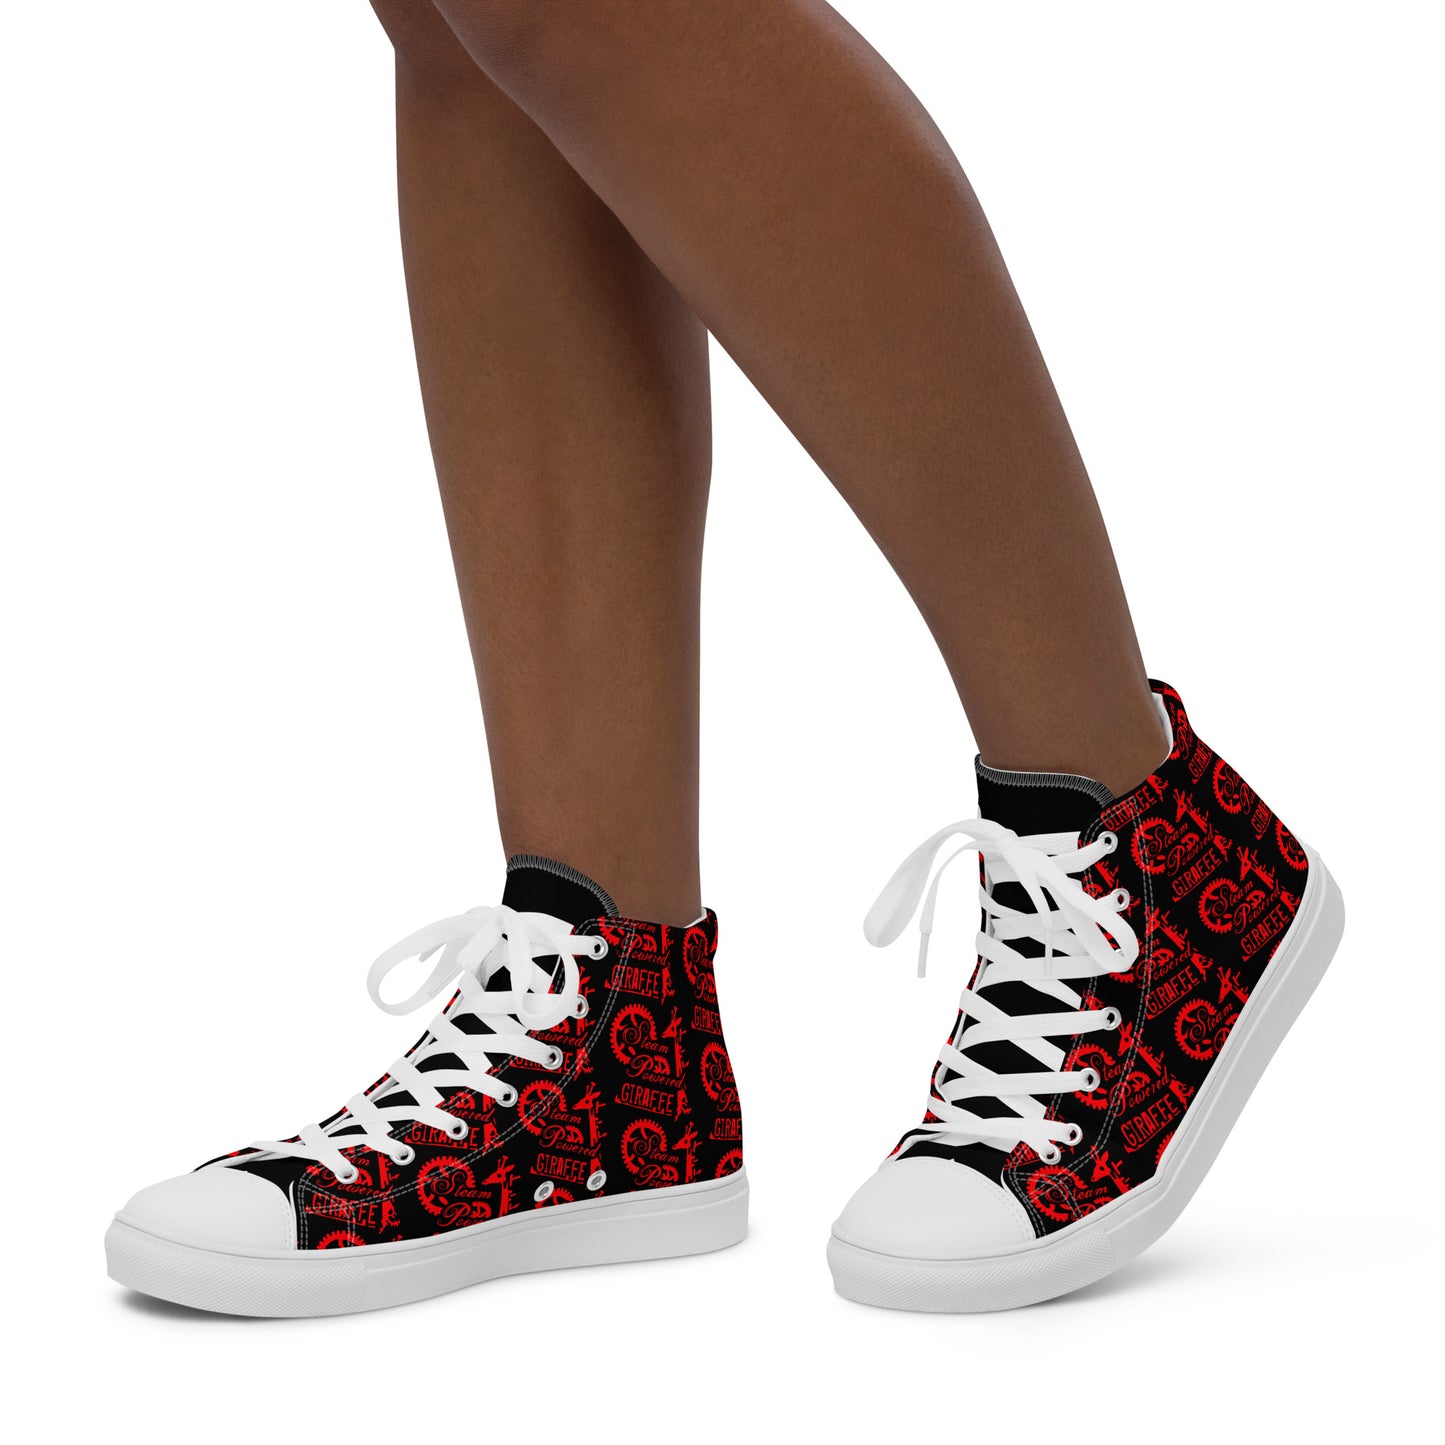 Women’s Black & Red SPG Logo High Top Shoes